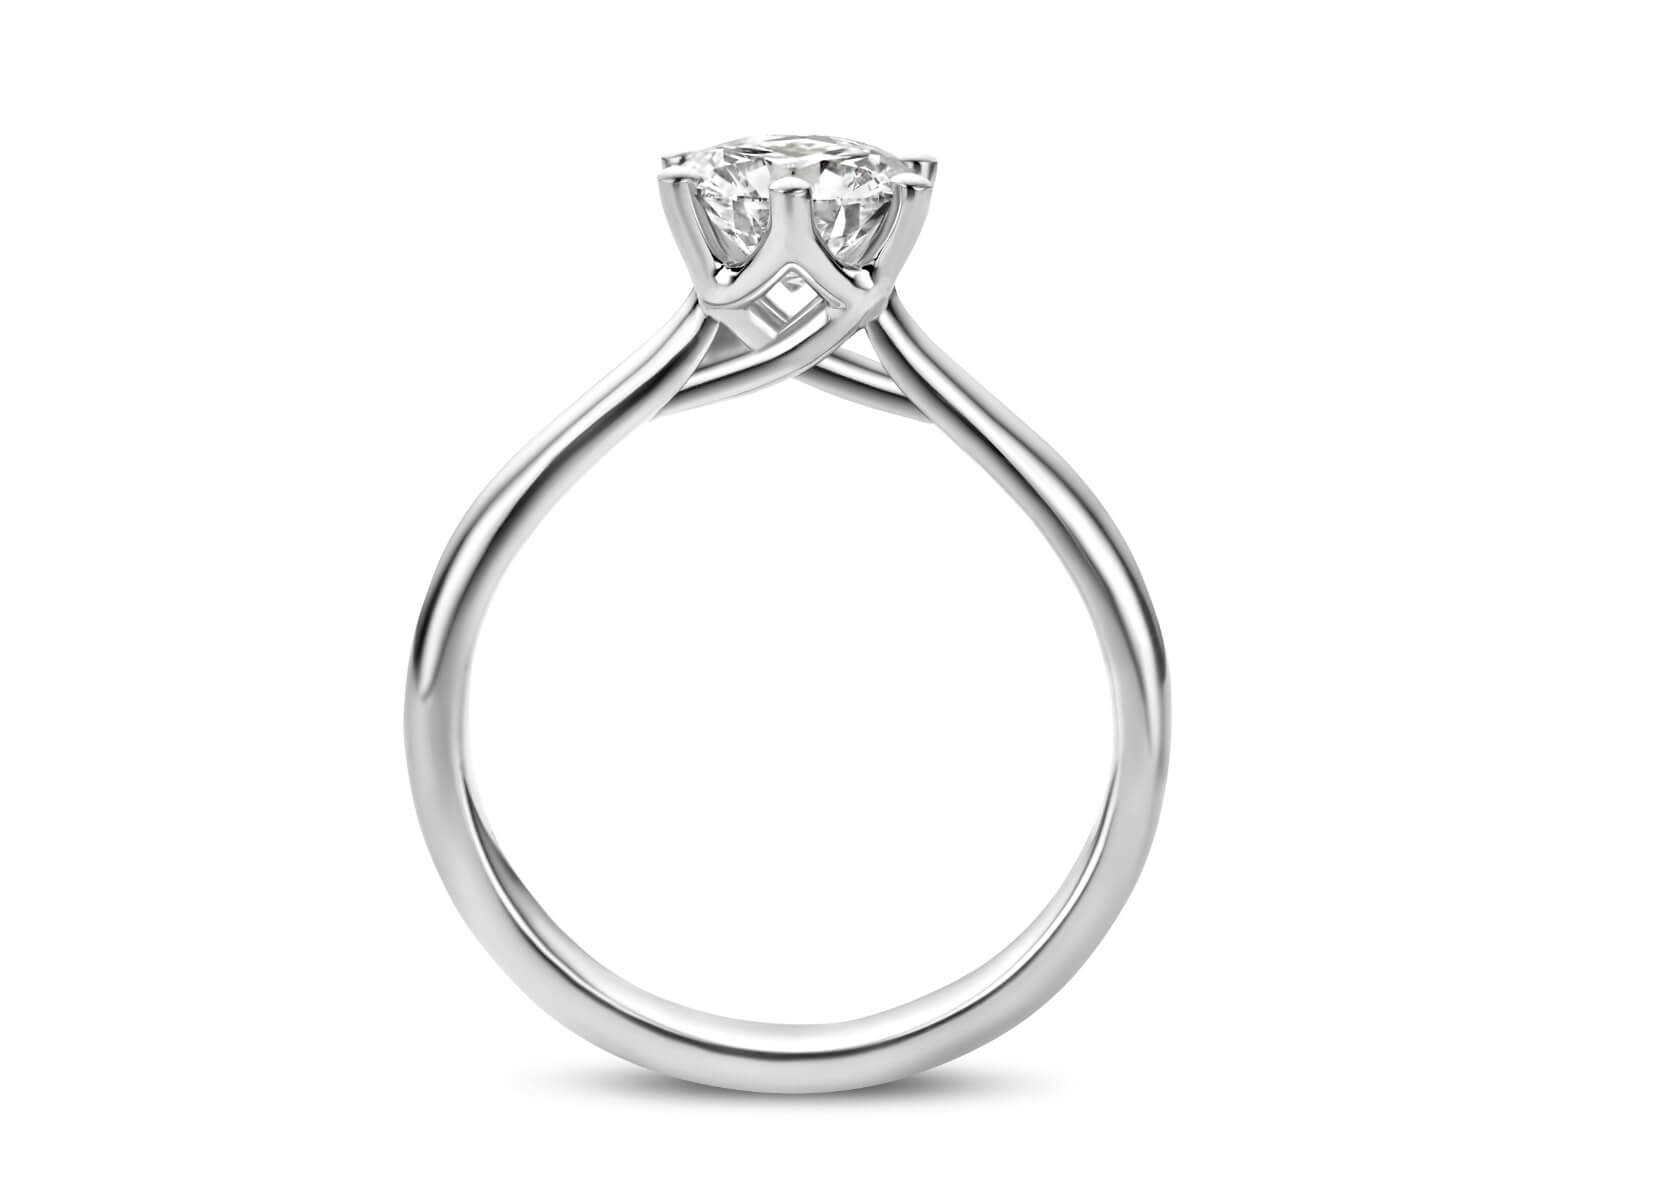 bloch royal solitaire diamond ring set in platinum 104ct fd20001670